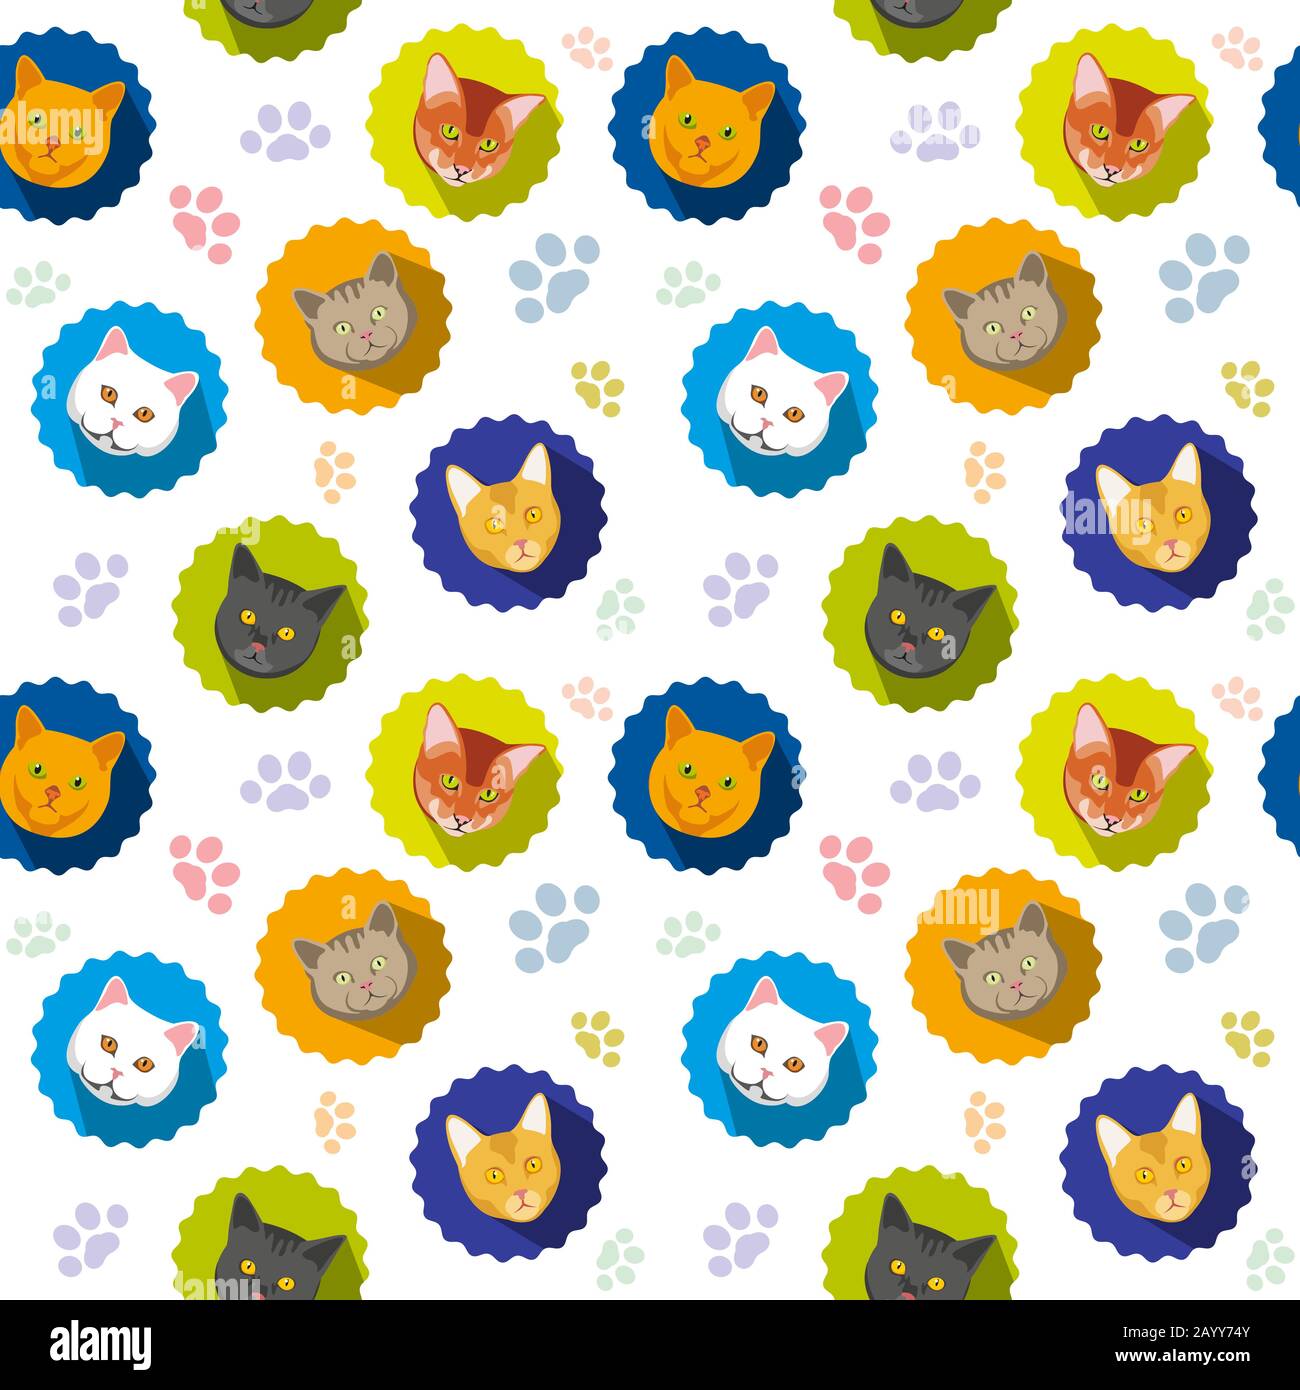 Cute cats vector seamless pattern. Animal cat with colored paws prints, background with head cats illustration Stock Vector